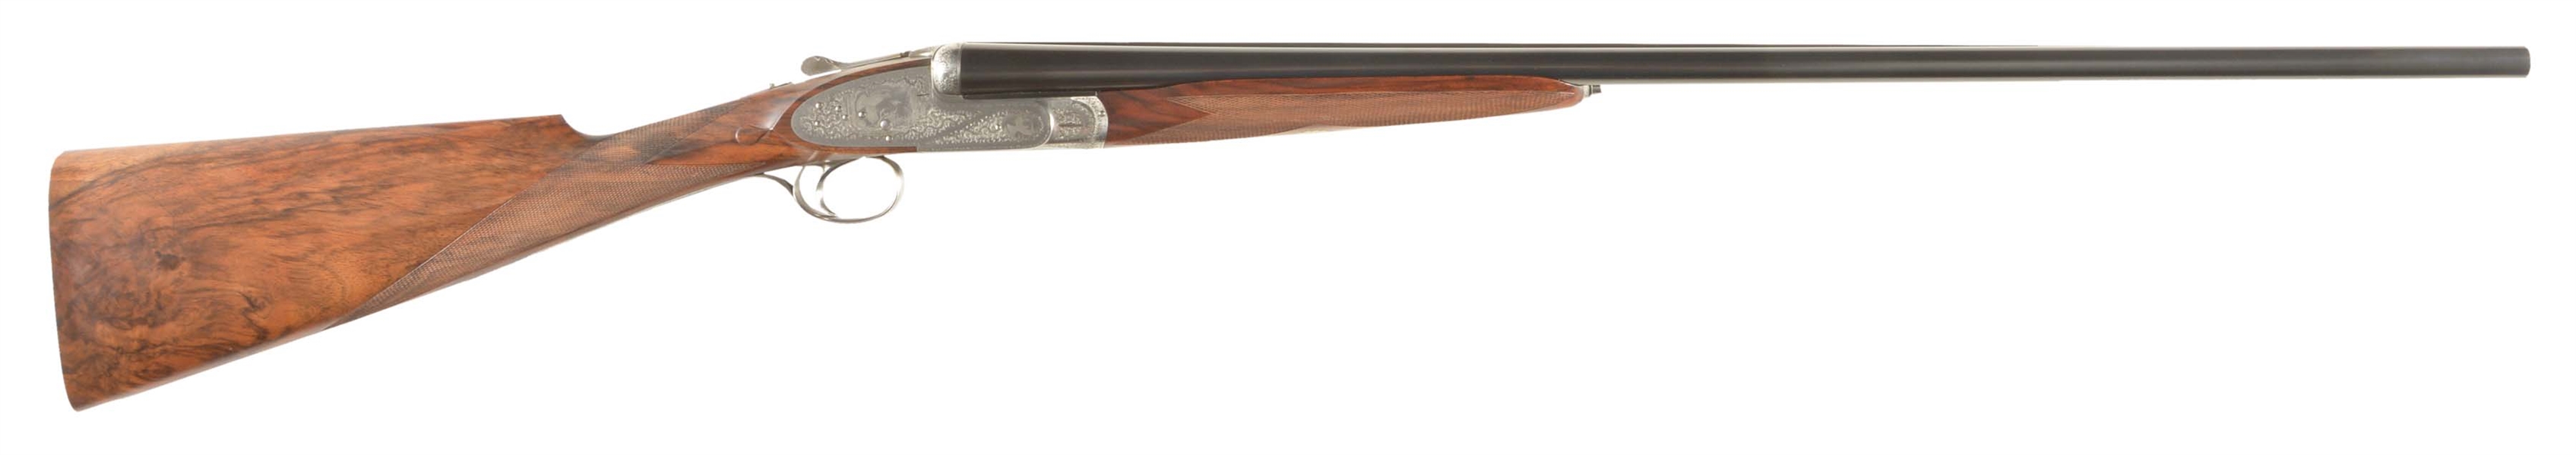 (M) BEAUTIFUL 28 GAUGE ABBIATICO & SALVINELLI SIDELOCK EJECTOR SINGLE TRIGGER GAME SHOTGUN WITH EXCEPTIONAL BULINO RUFFED GROUSE GAME SCENES BY GOLDANI. 